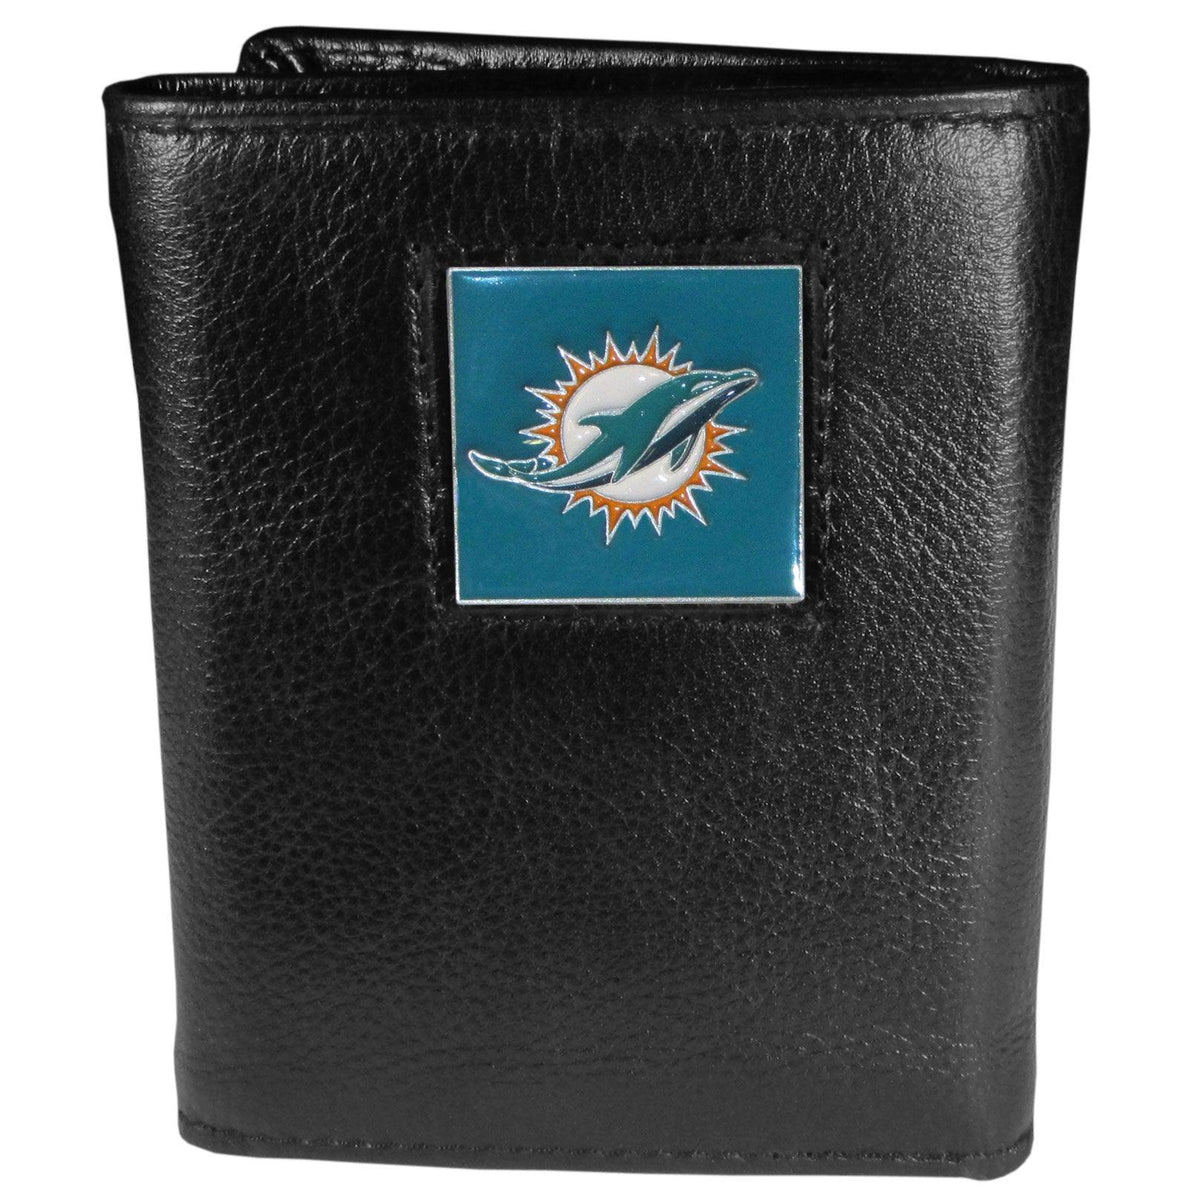 Miami Dolphins Deluxe Leather Tri-fold Wallet Packaged in Gift Box - Flyclothing LLC